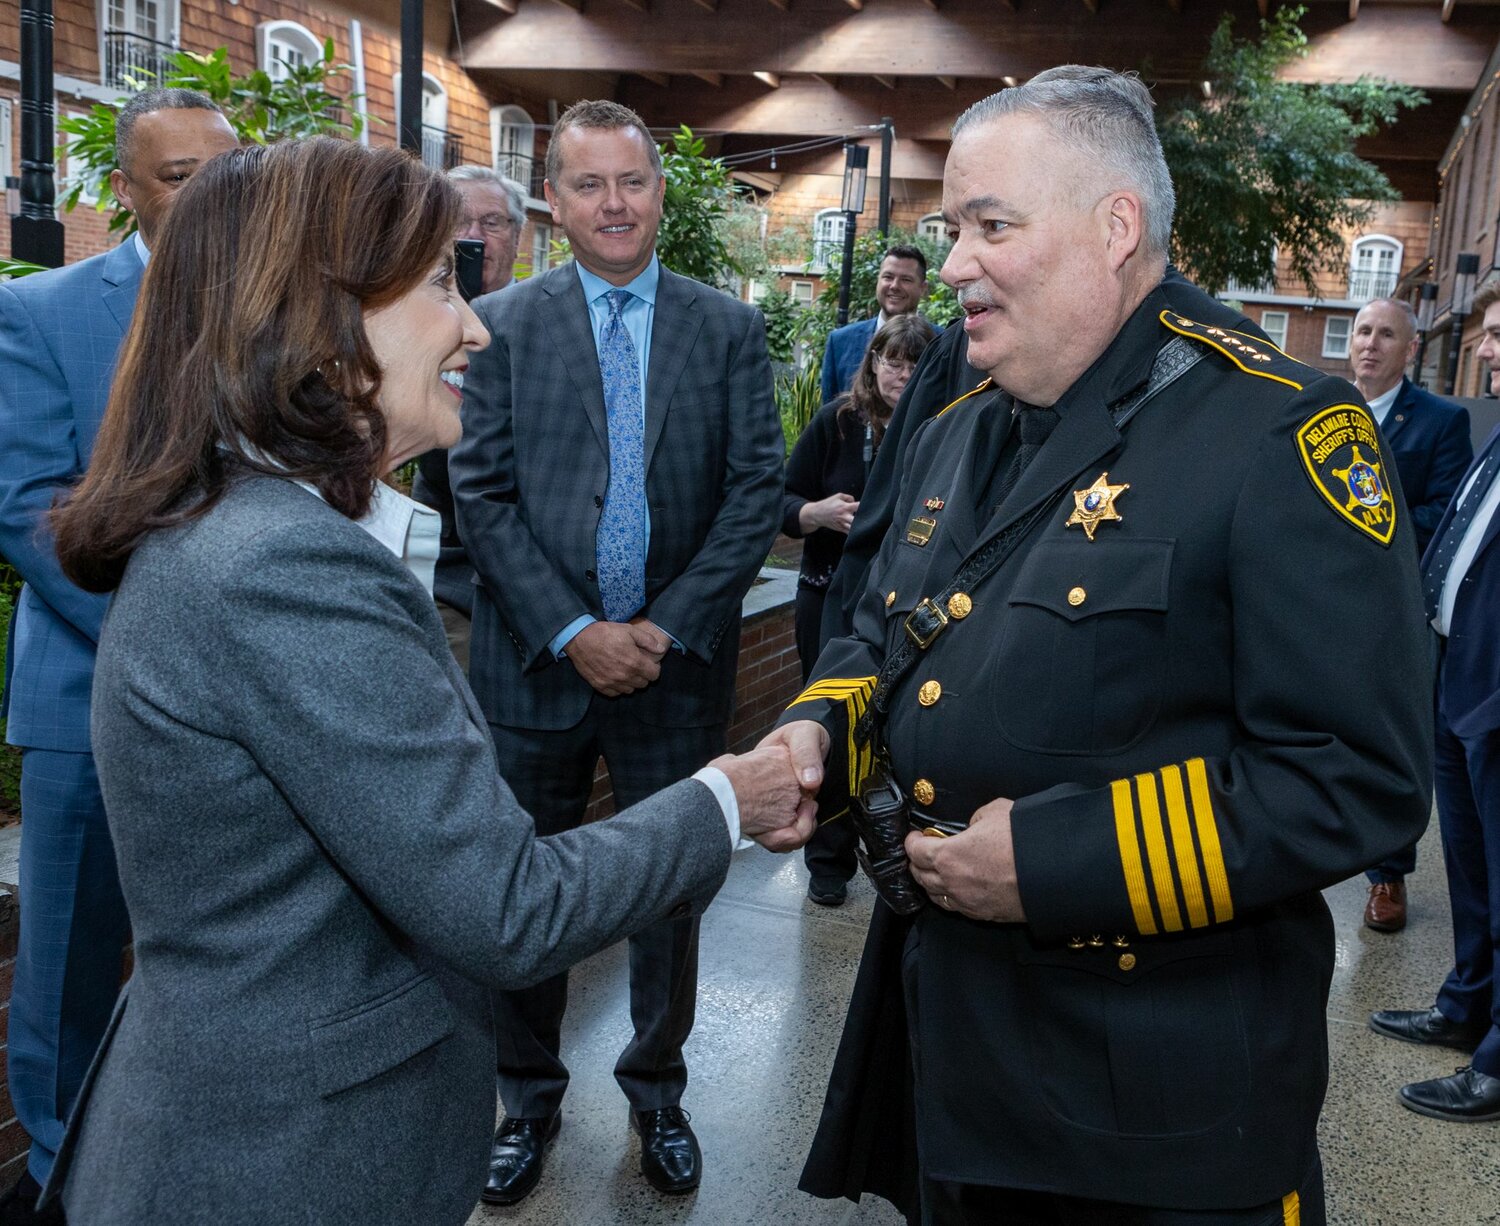 Sheriff Craig DuMond greets Governor Kathy Hochul prior to the swearing-in ceremony in Albany.